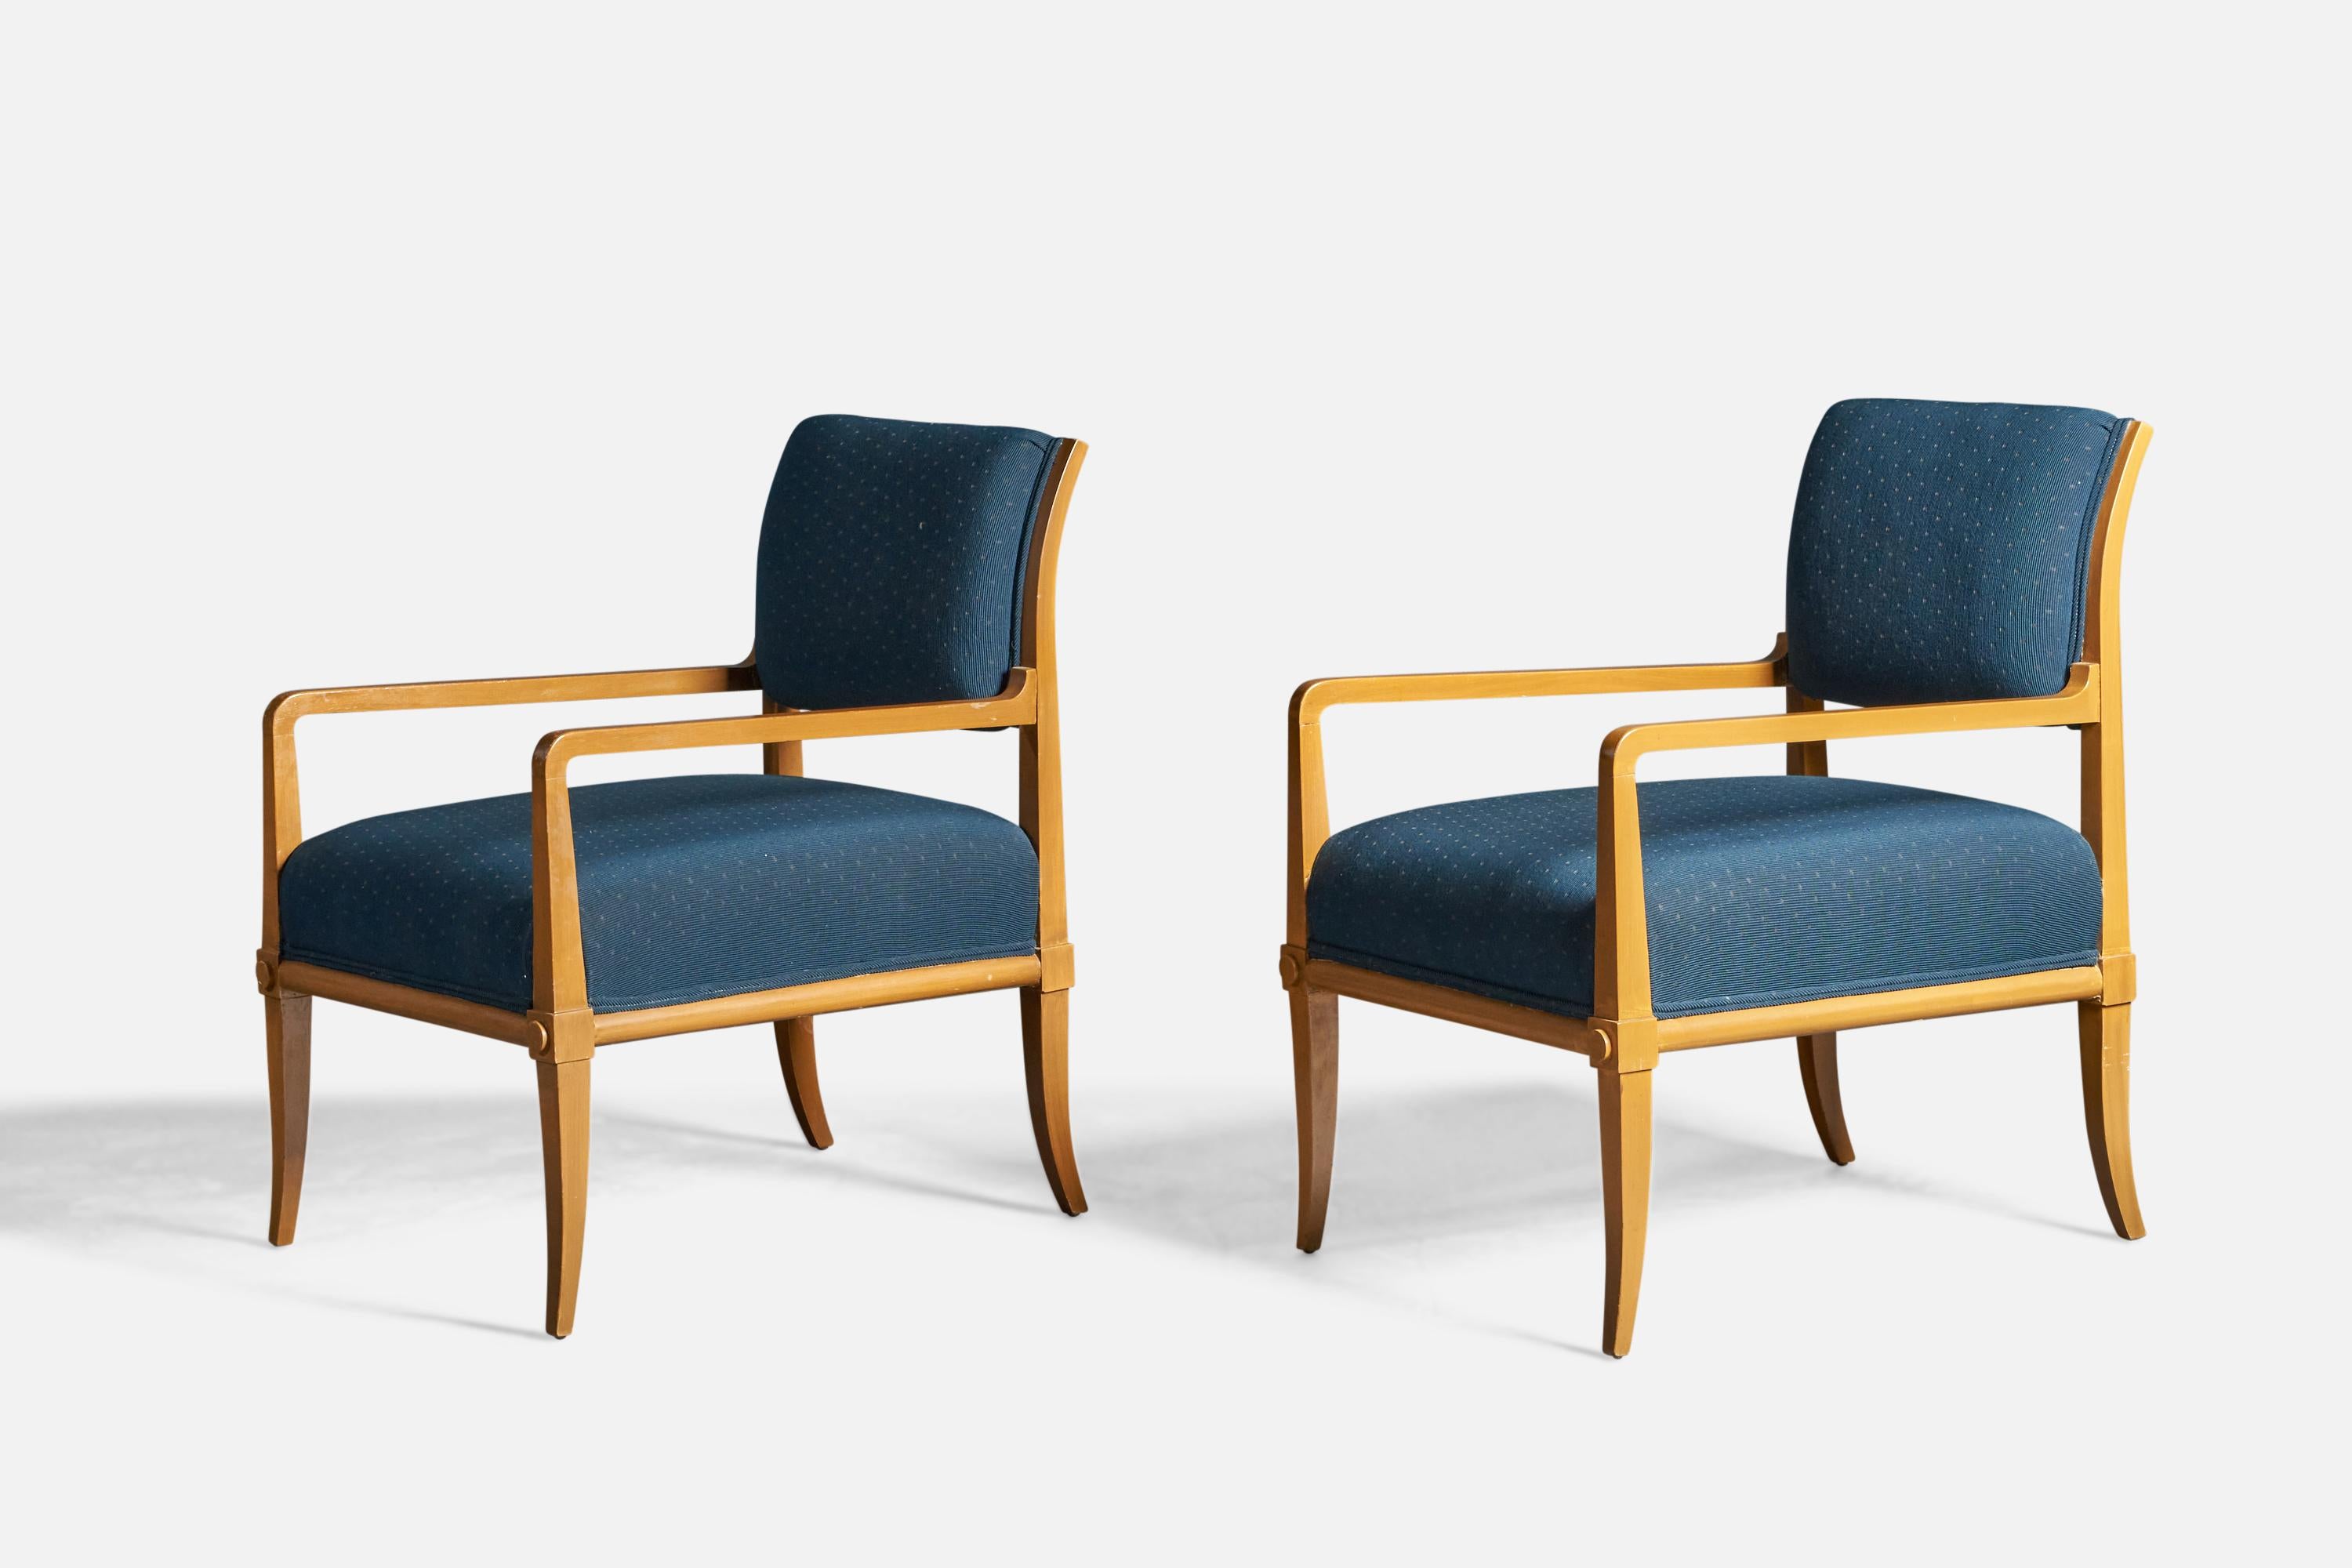 A pair of wood and blue fabric lounge chairs, designed by Tommi Parzinger and produced by Parzinger Originals, USA, 1950s.